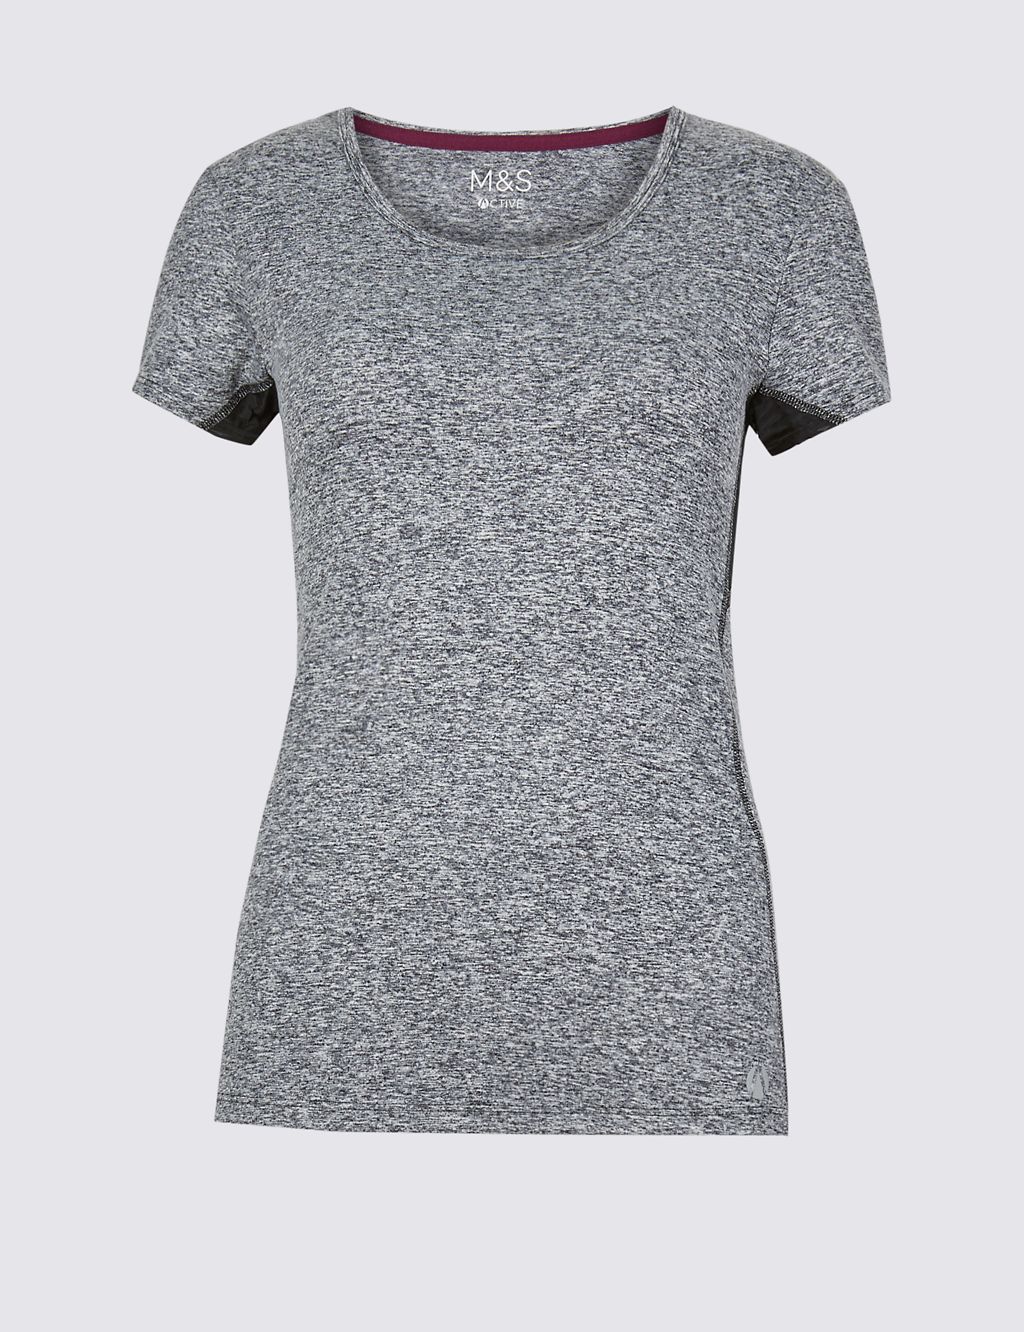 Textured Quick Dry Short Sleeve Top 1 of 6